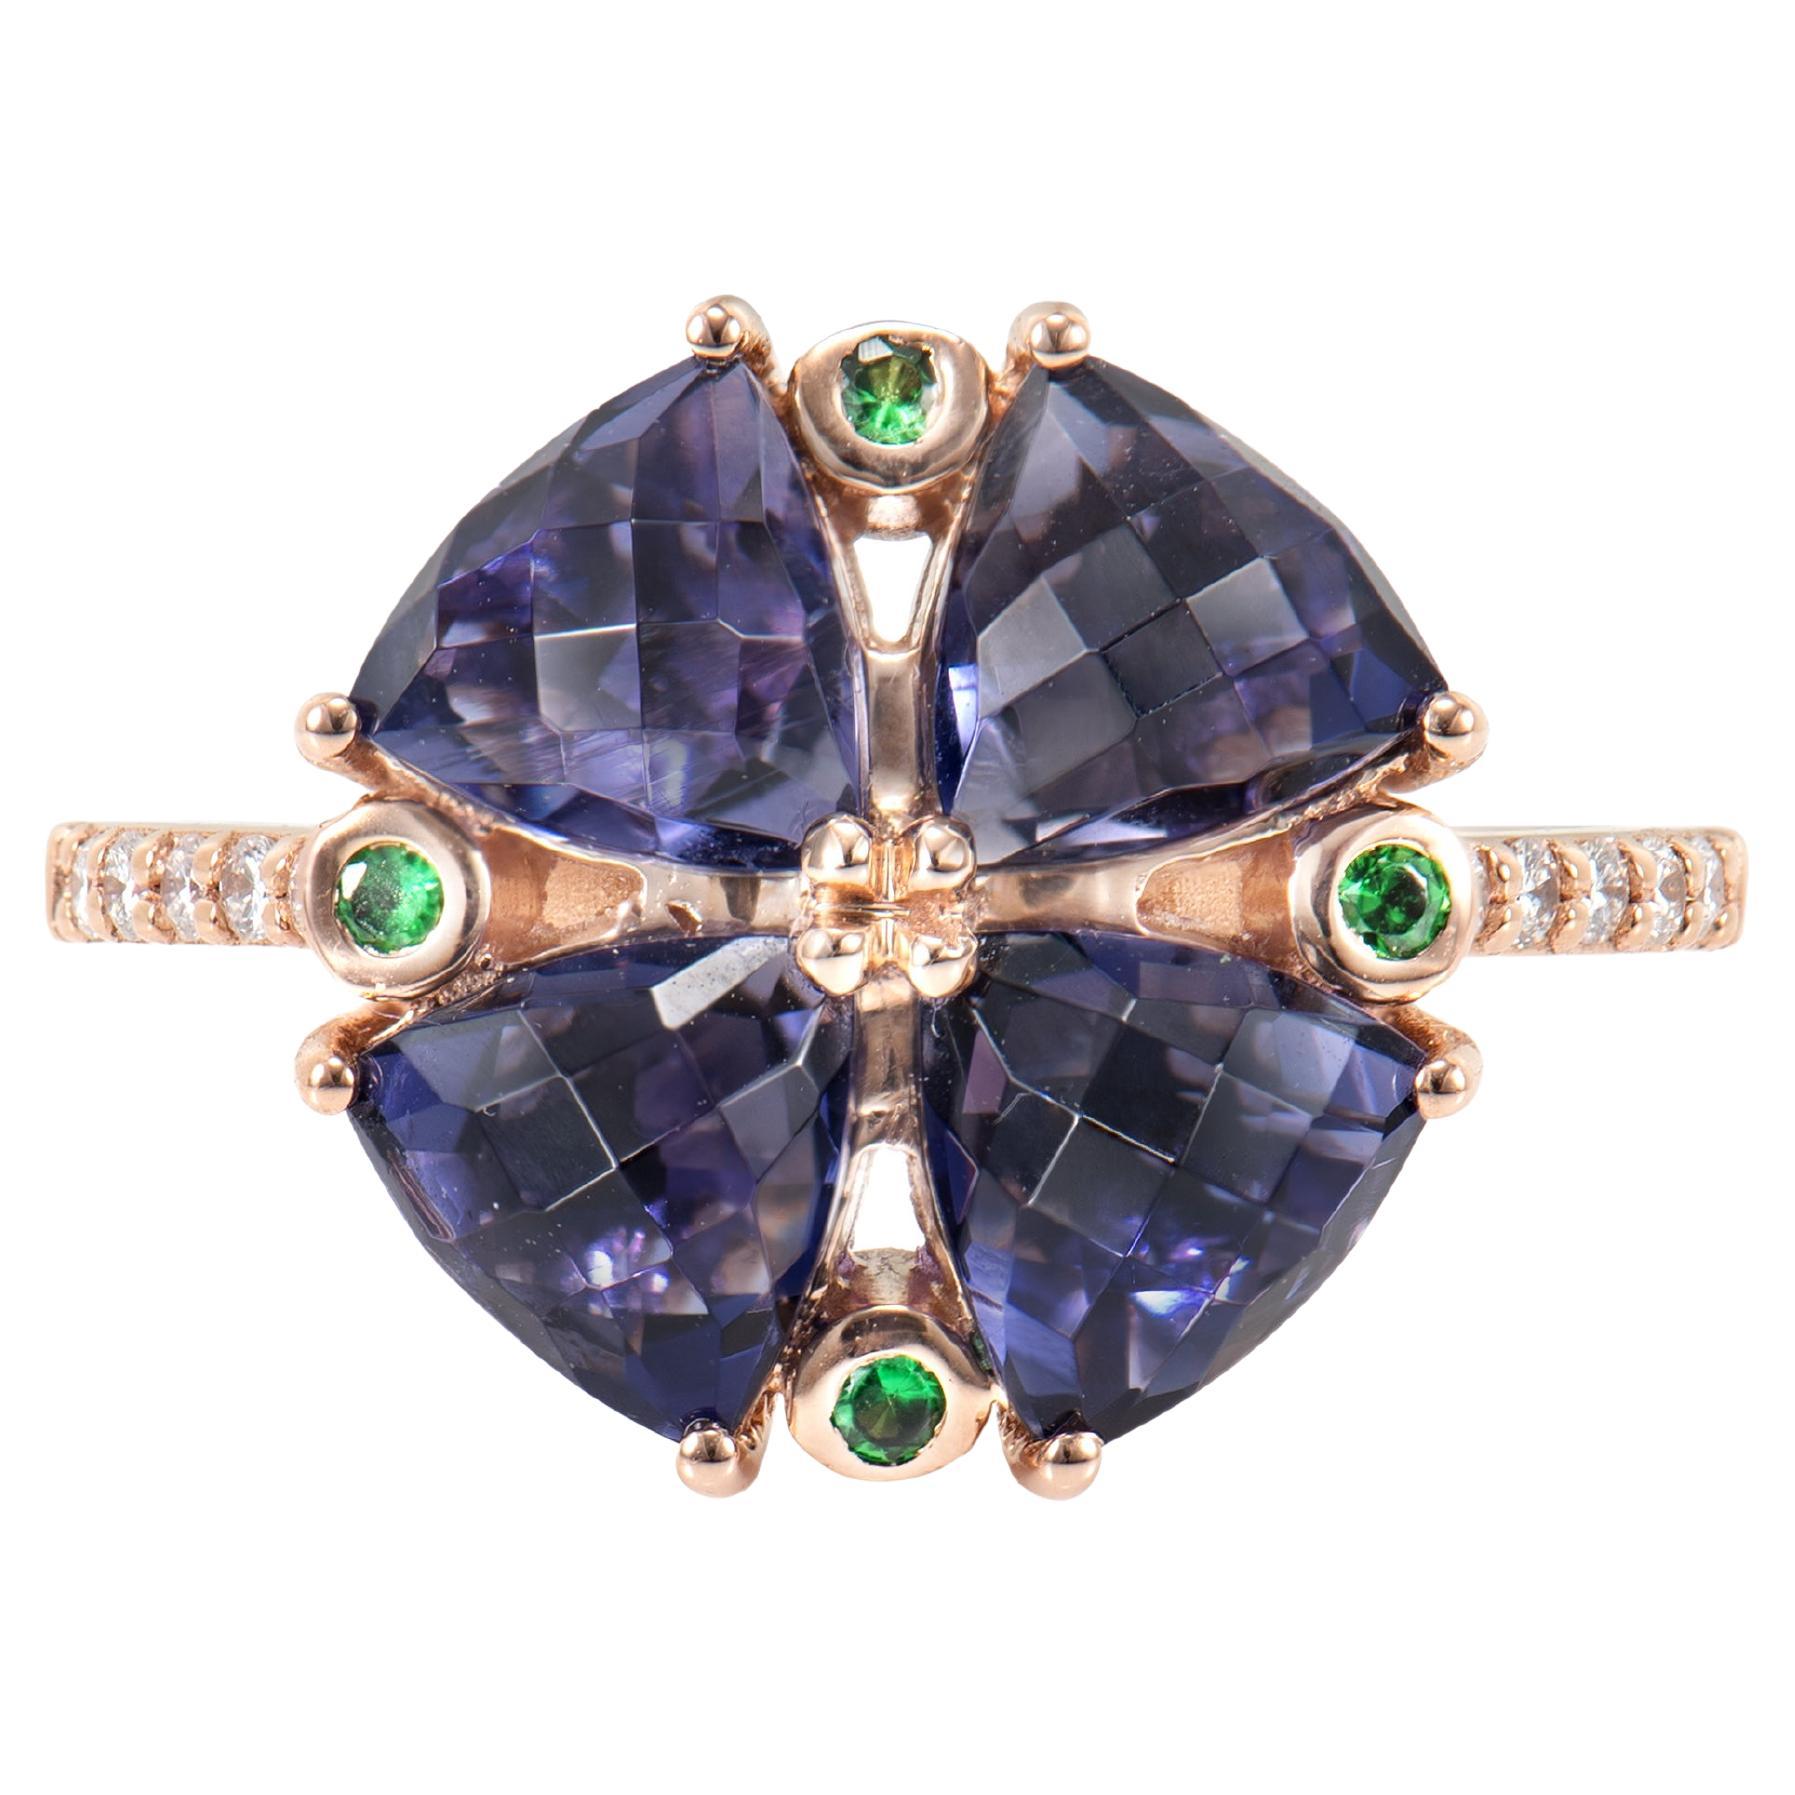 2.91 Carat Iolite Fancy Ring in 18K Rose Gold with Tsavorite and White Diamond